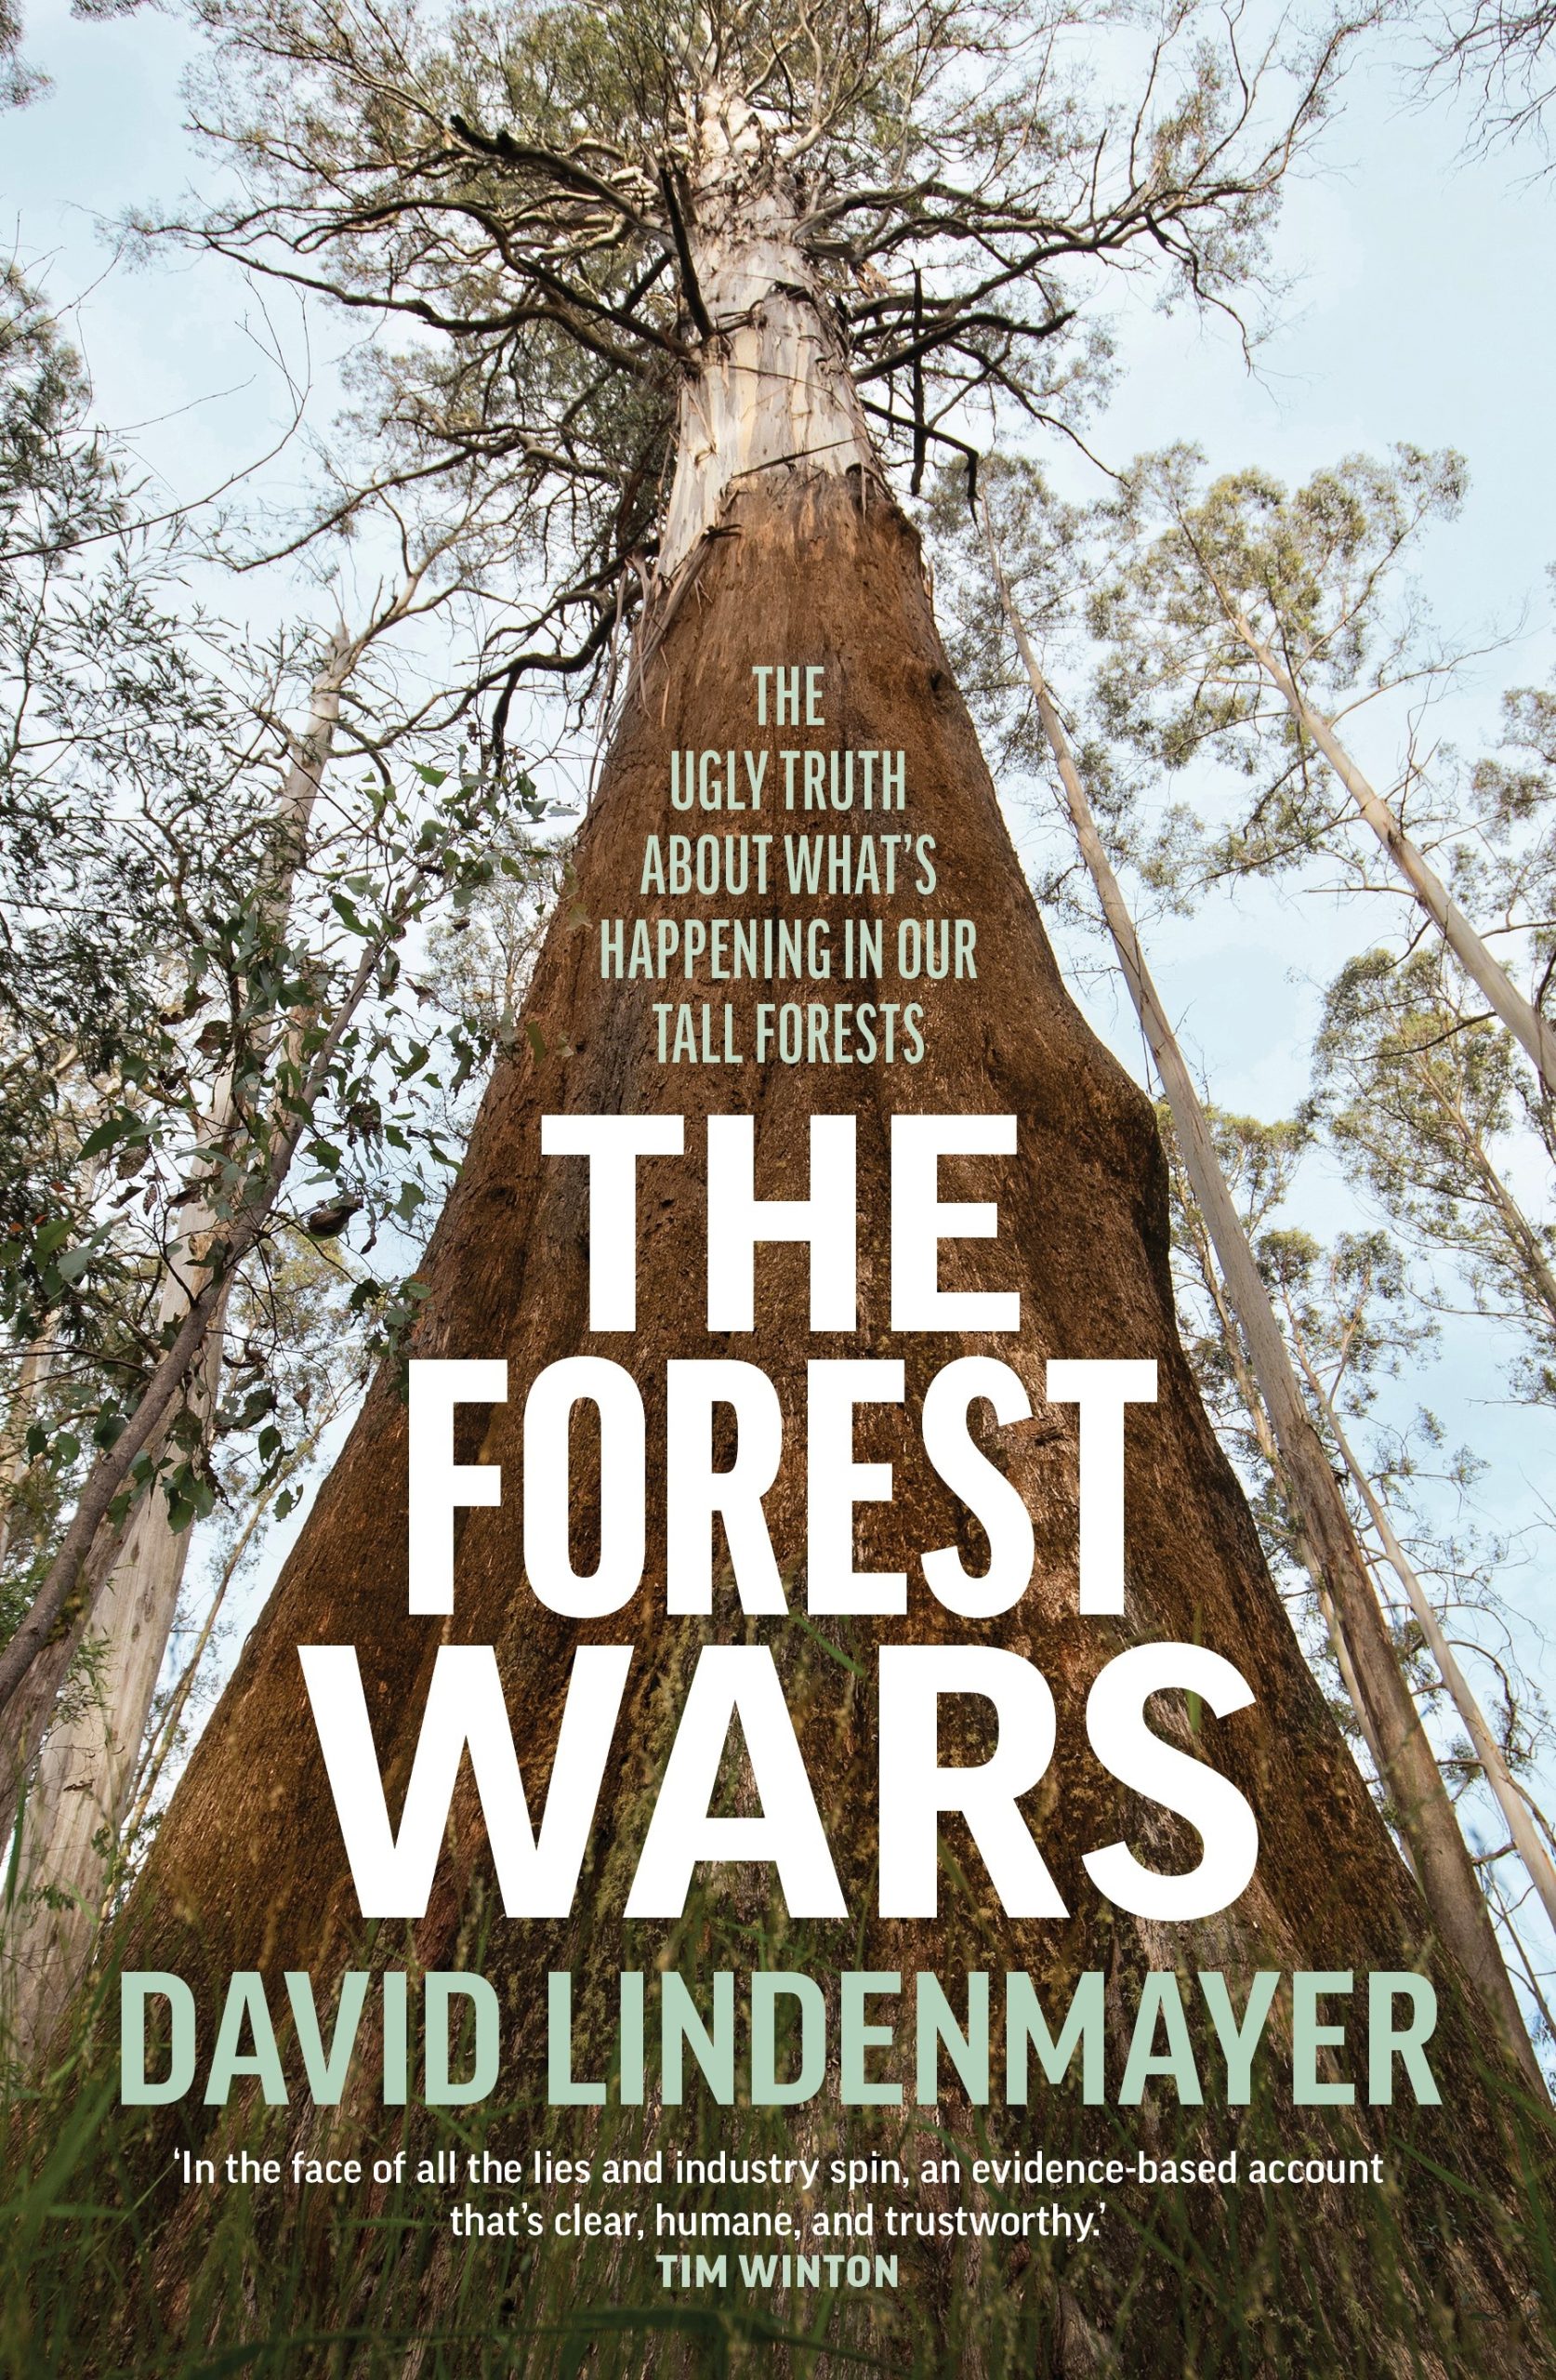 Forest Wars: The ugly truth about what's happening in our tall forests